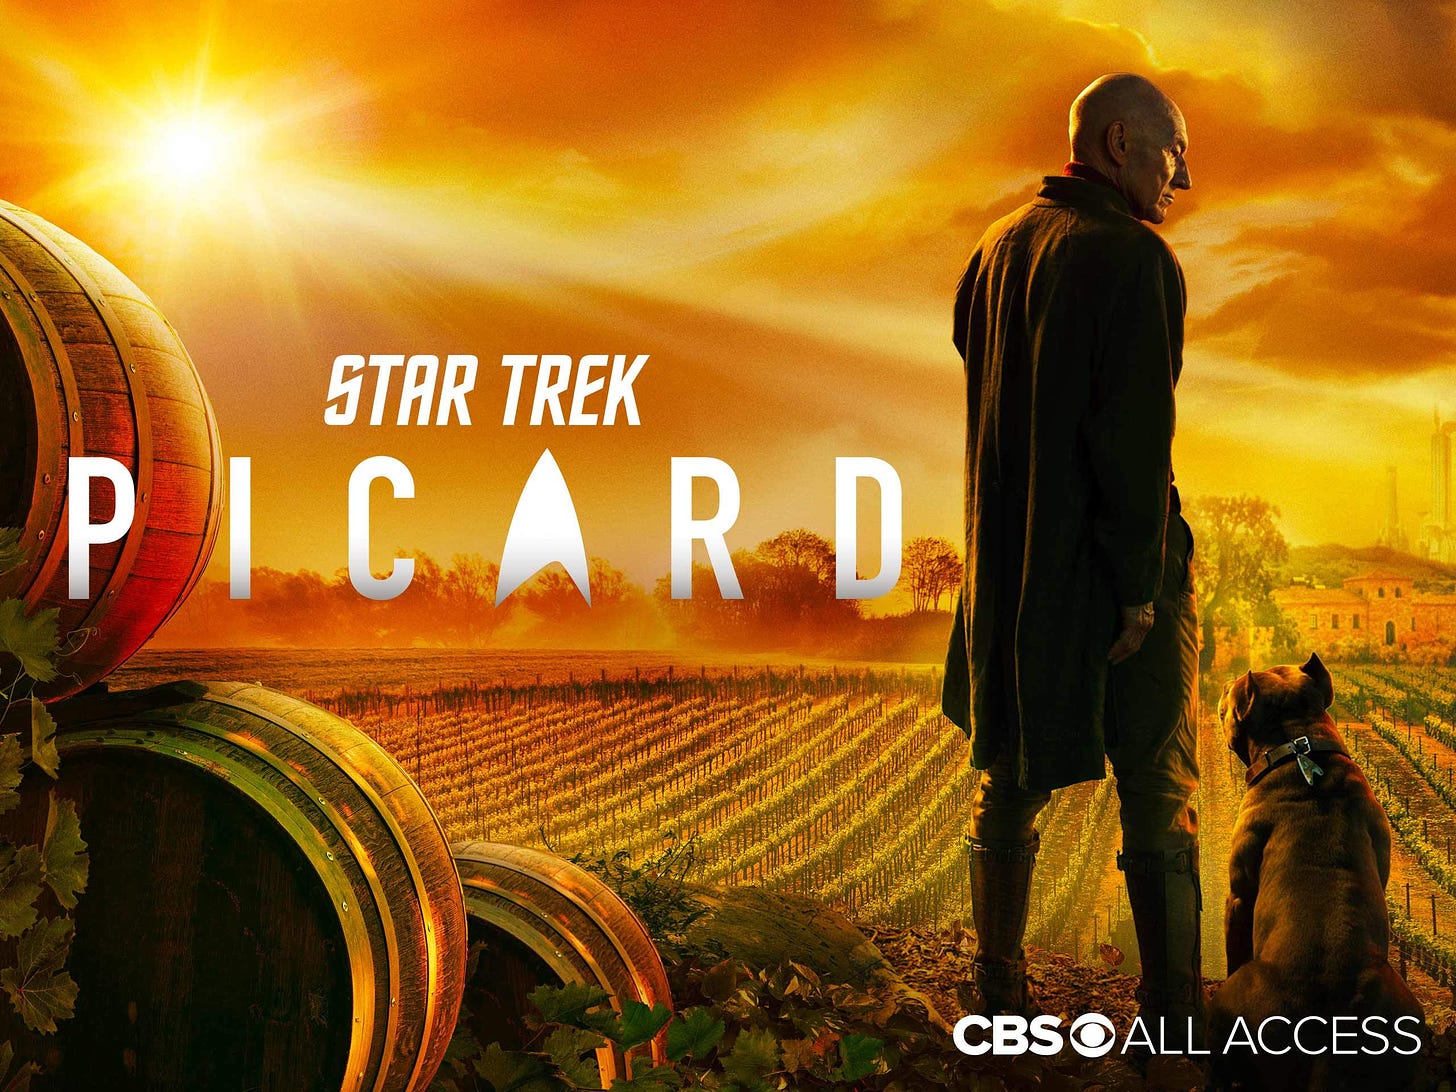 Star Trek Picard starring Patrick Stewart, Alison Pill and Isa Briones. Click here to check it out.